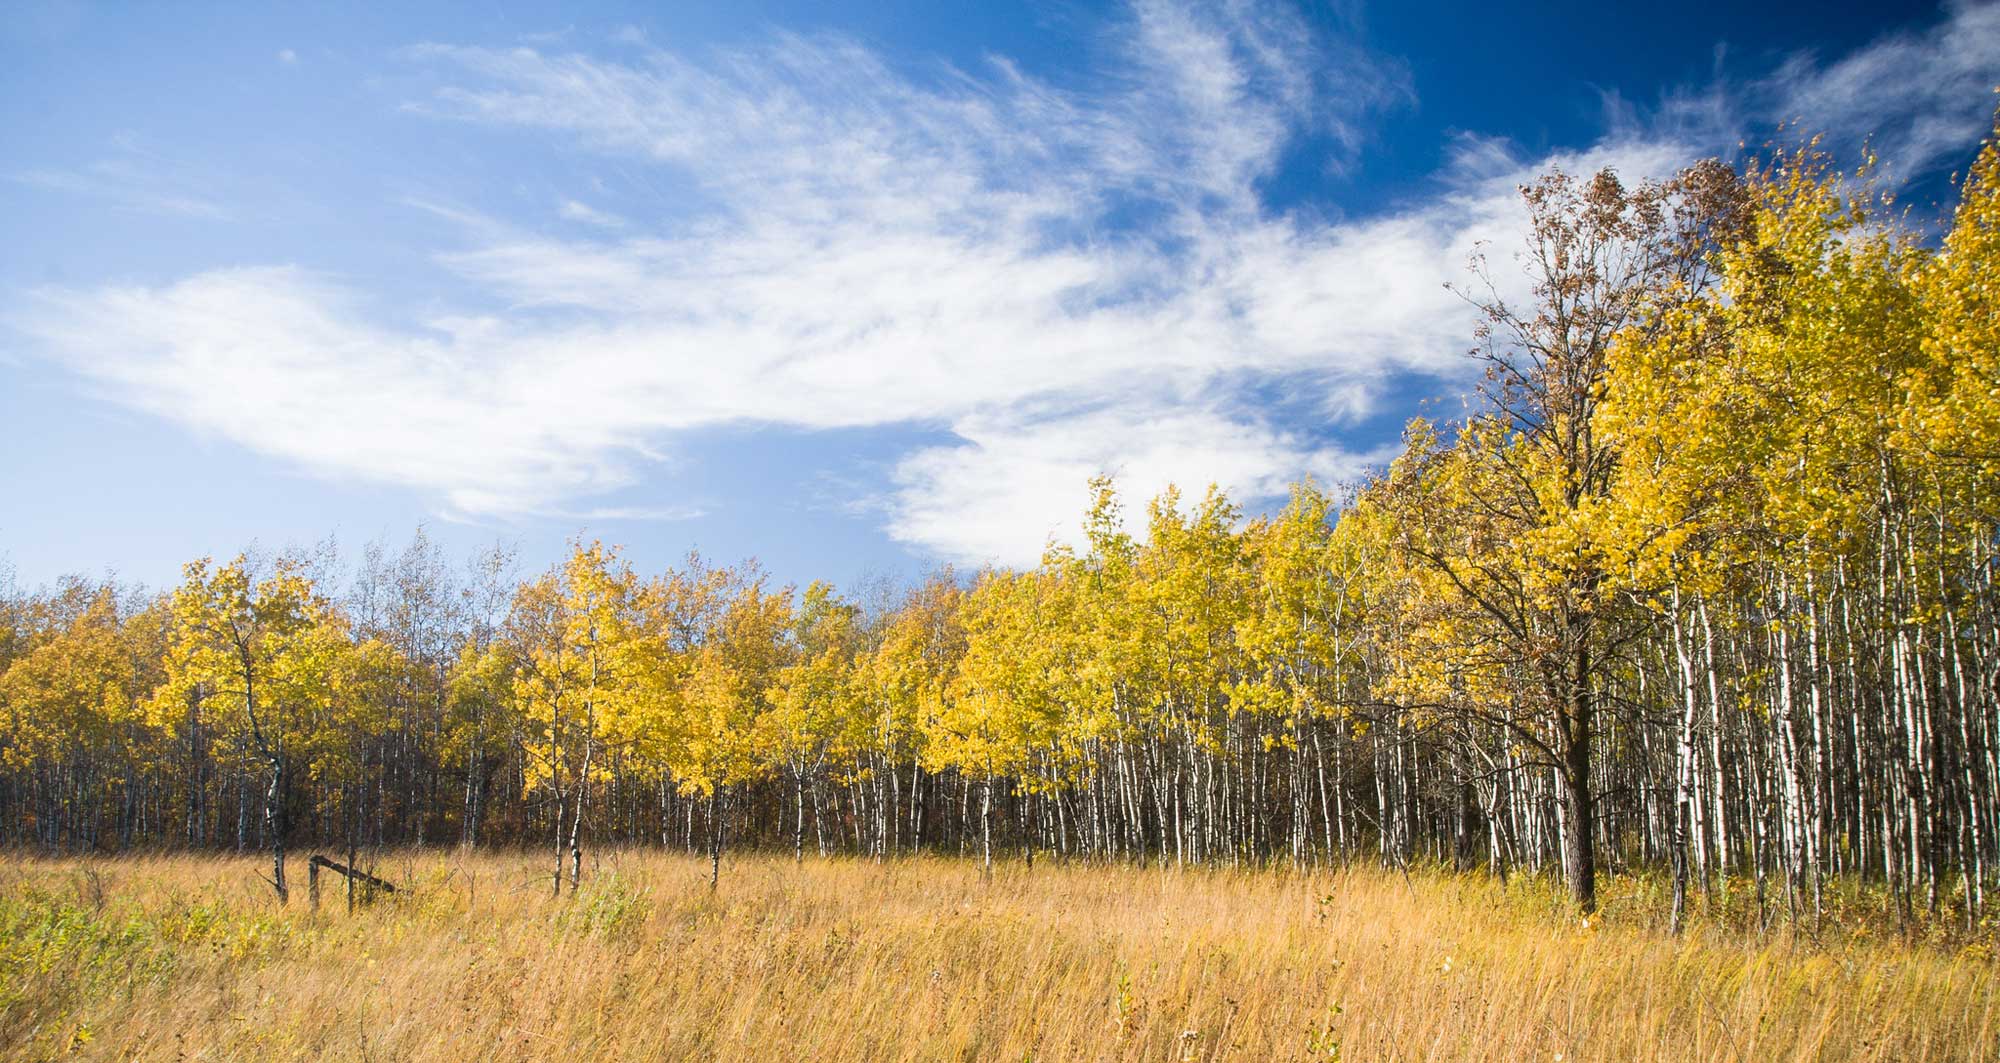 Photograph of aspen parklands in the Caribou Wildlife Management Area of Minnesota. The photo shows a stand of aspen trees that have white bark on their trunks and yellow leaves flanking the edge of a field of yellow grass. The sky is blue with wispy clouds.